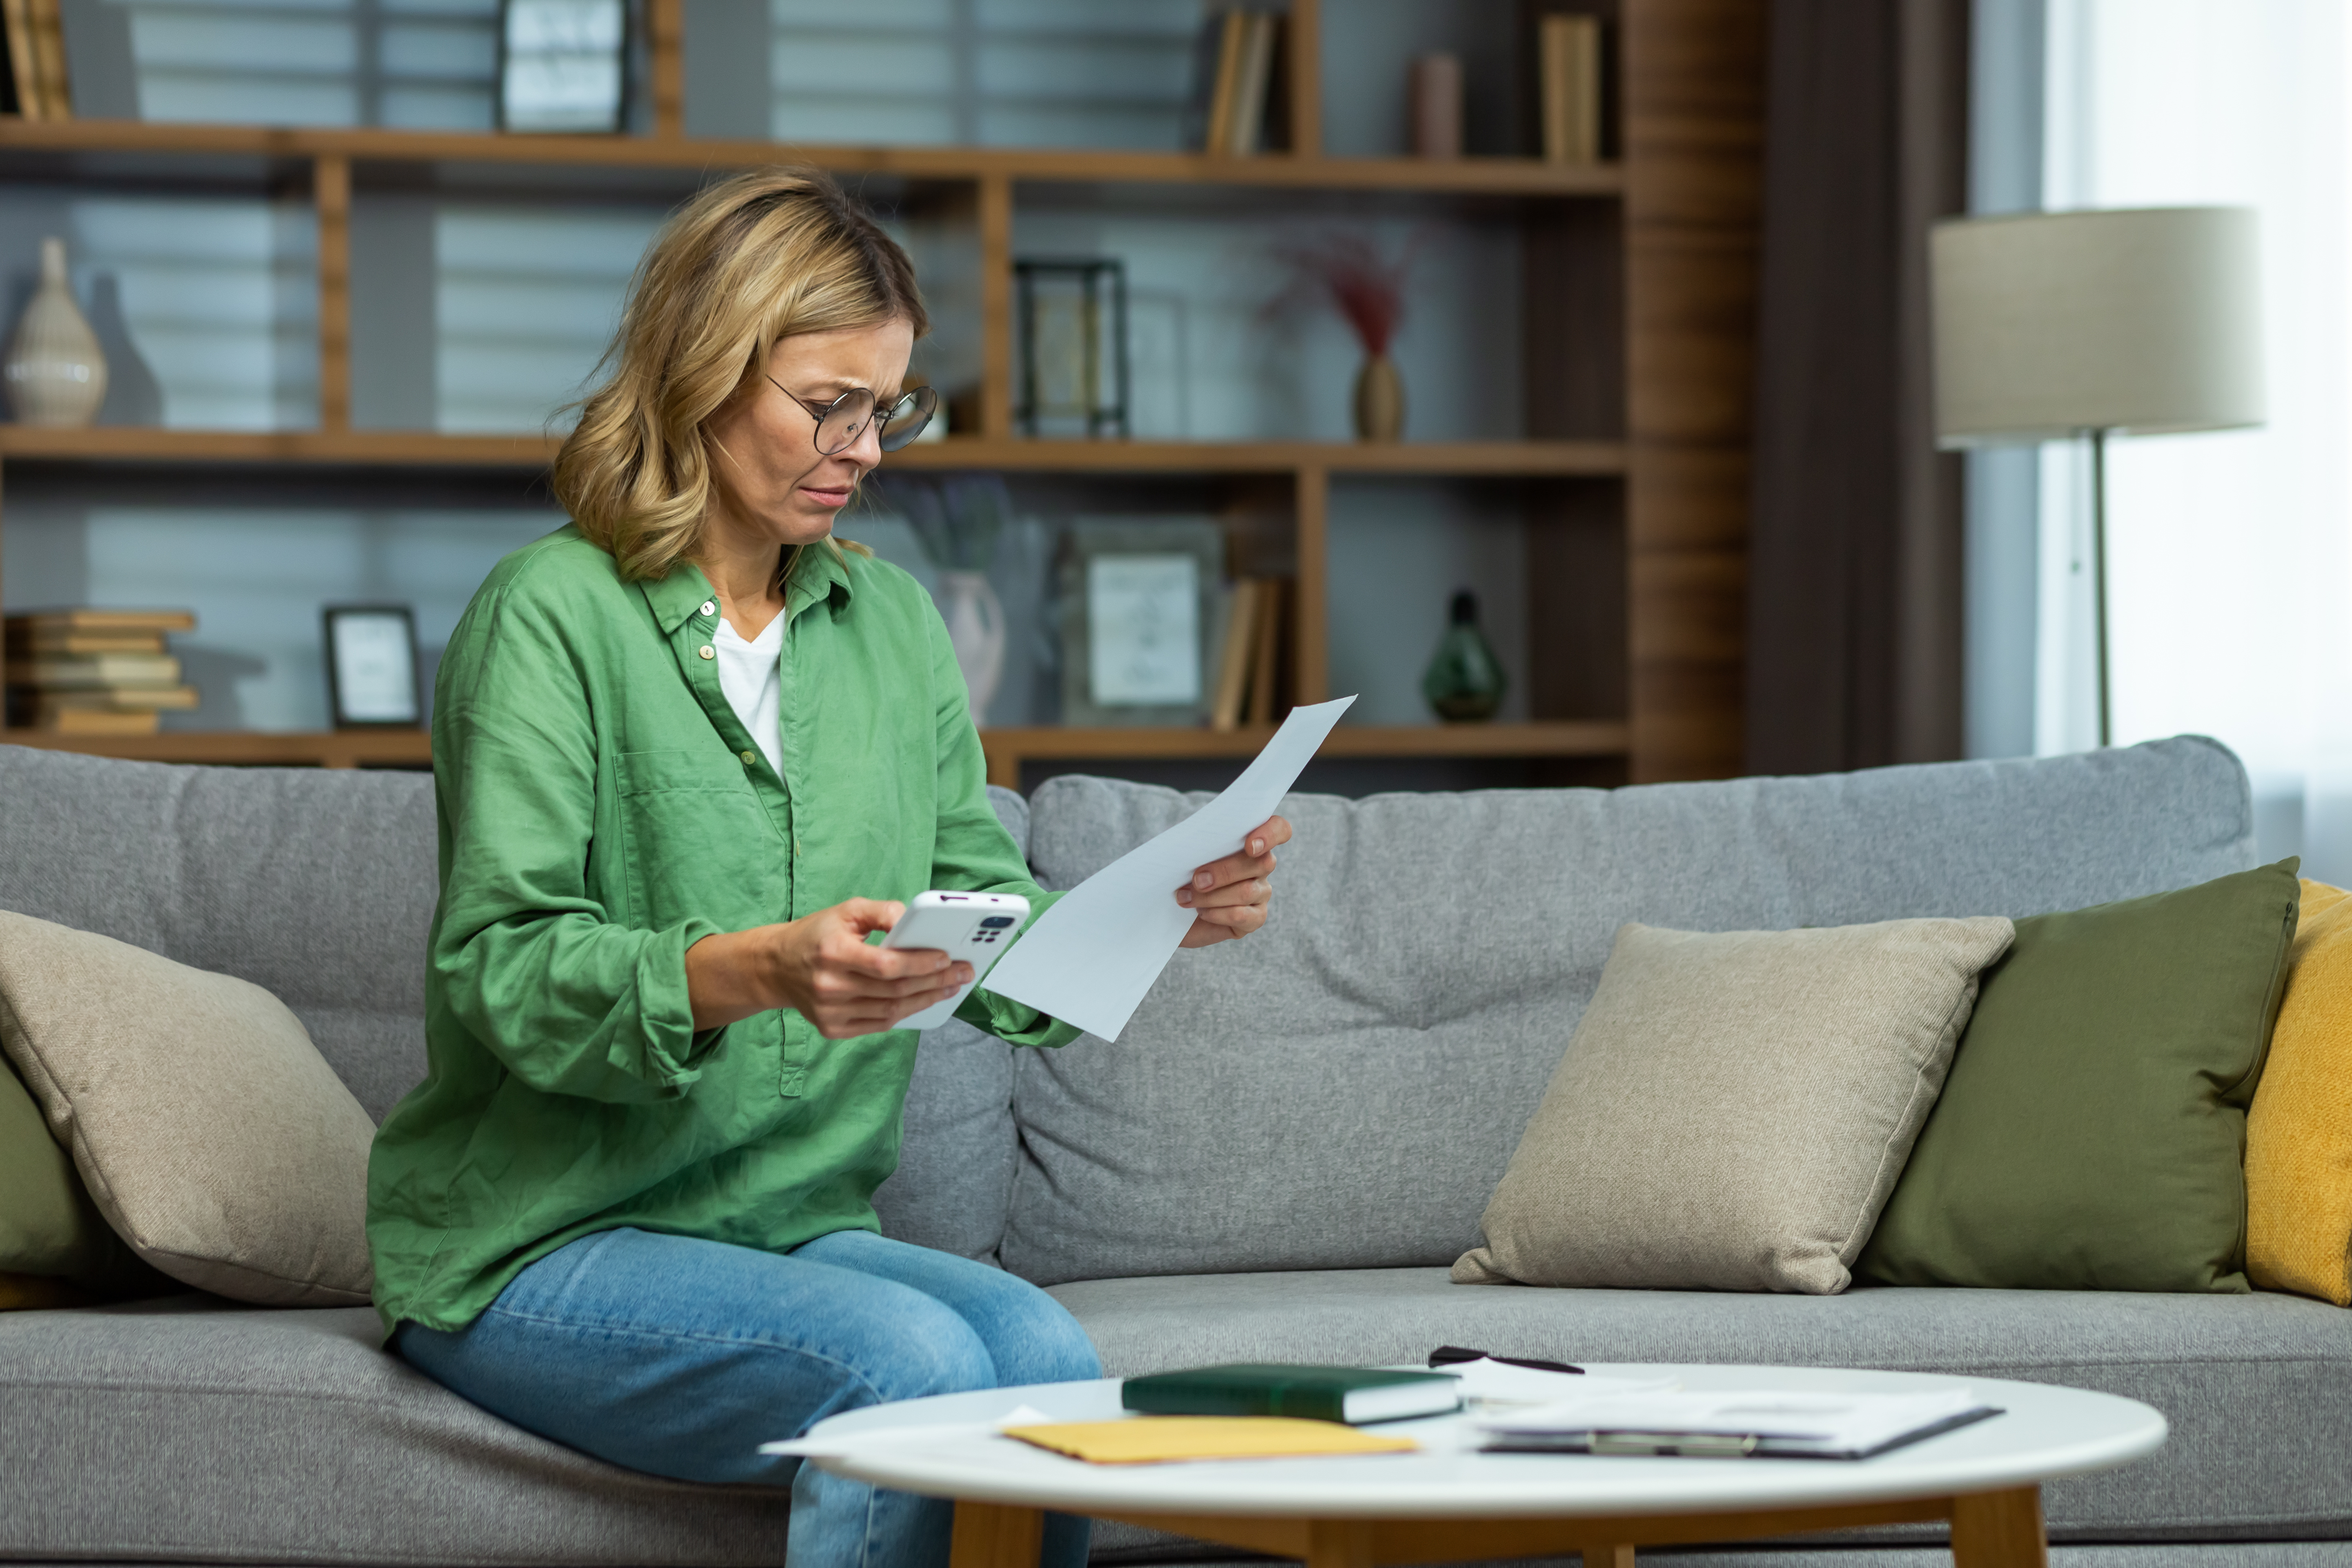 Blonde woman on sofa looking at paperwork in her hand with concerned expression